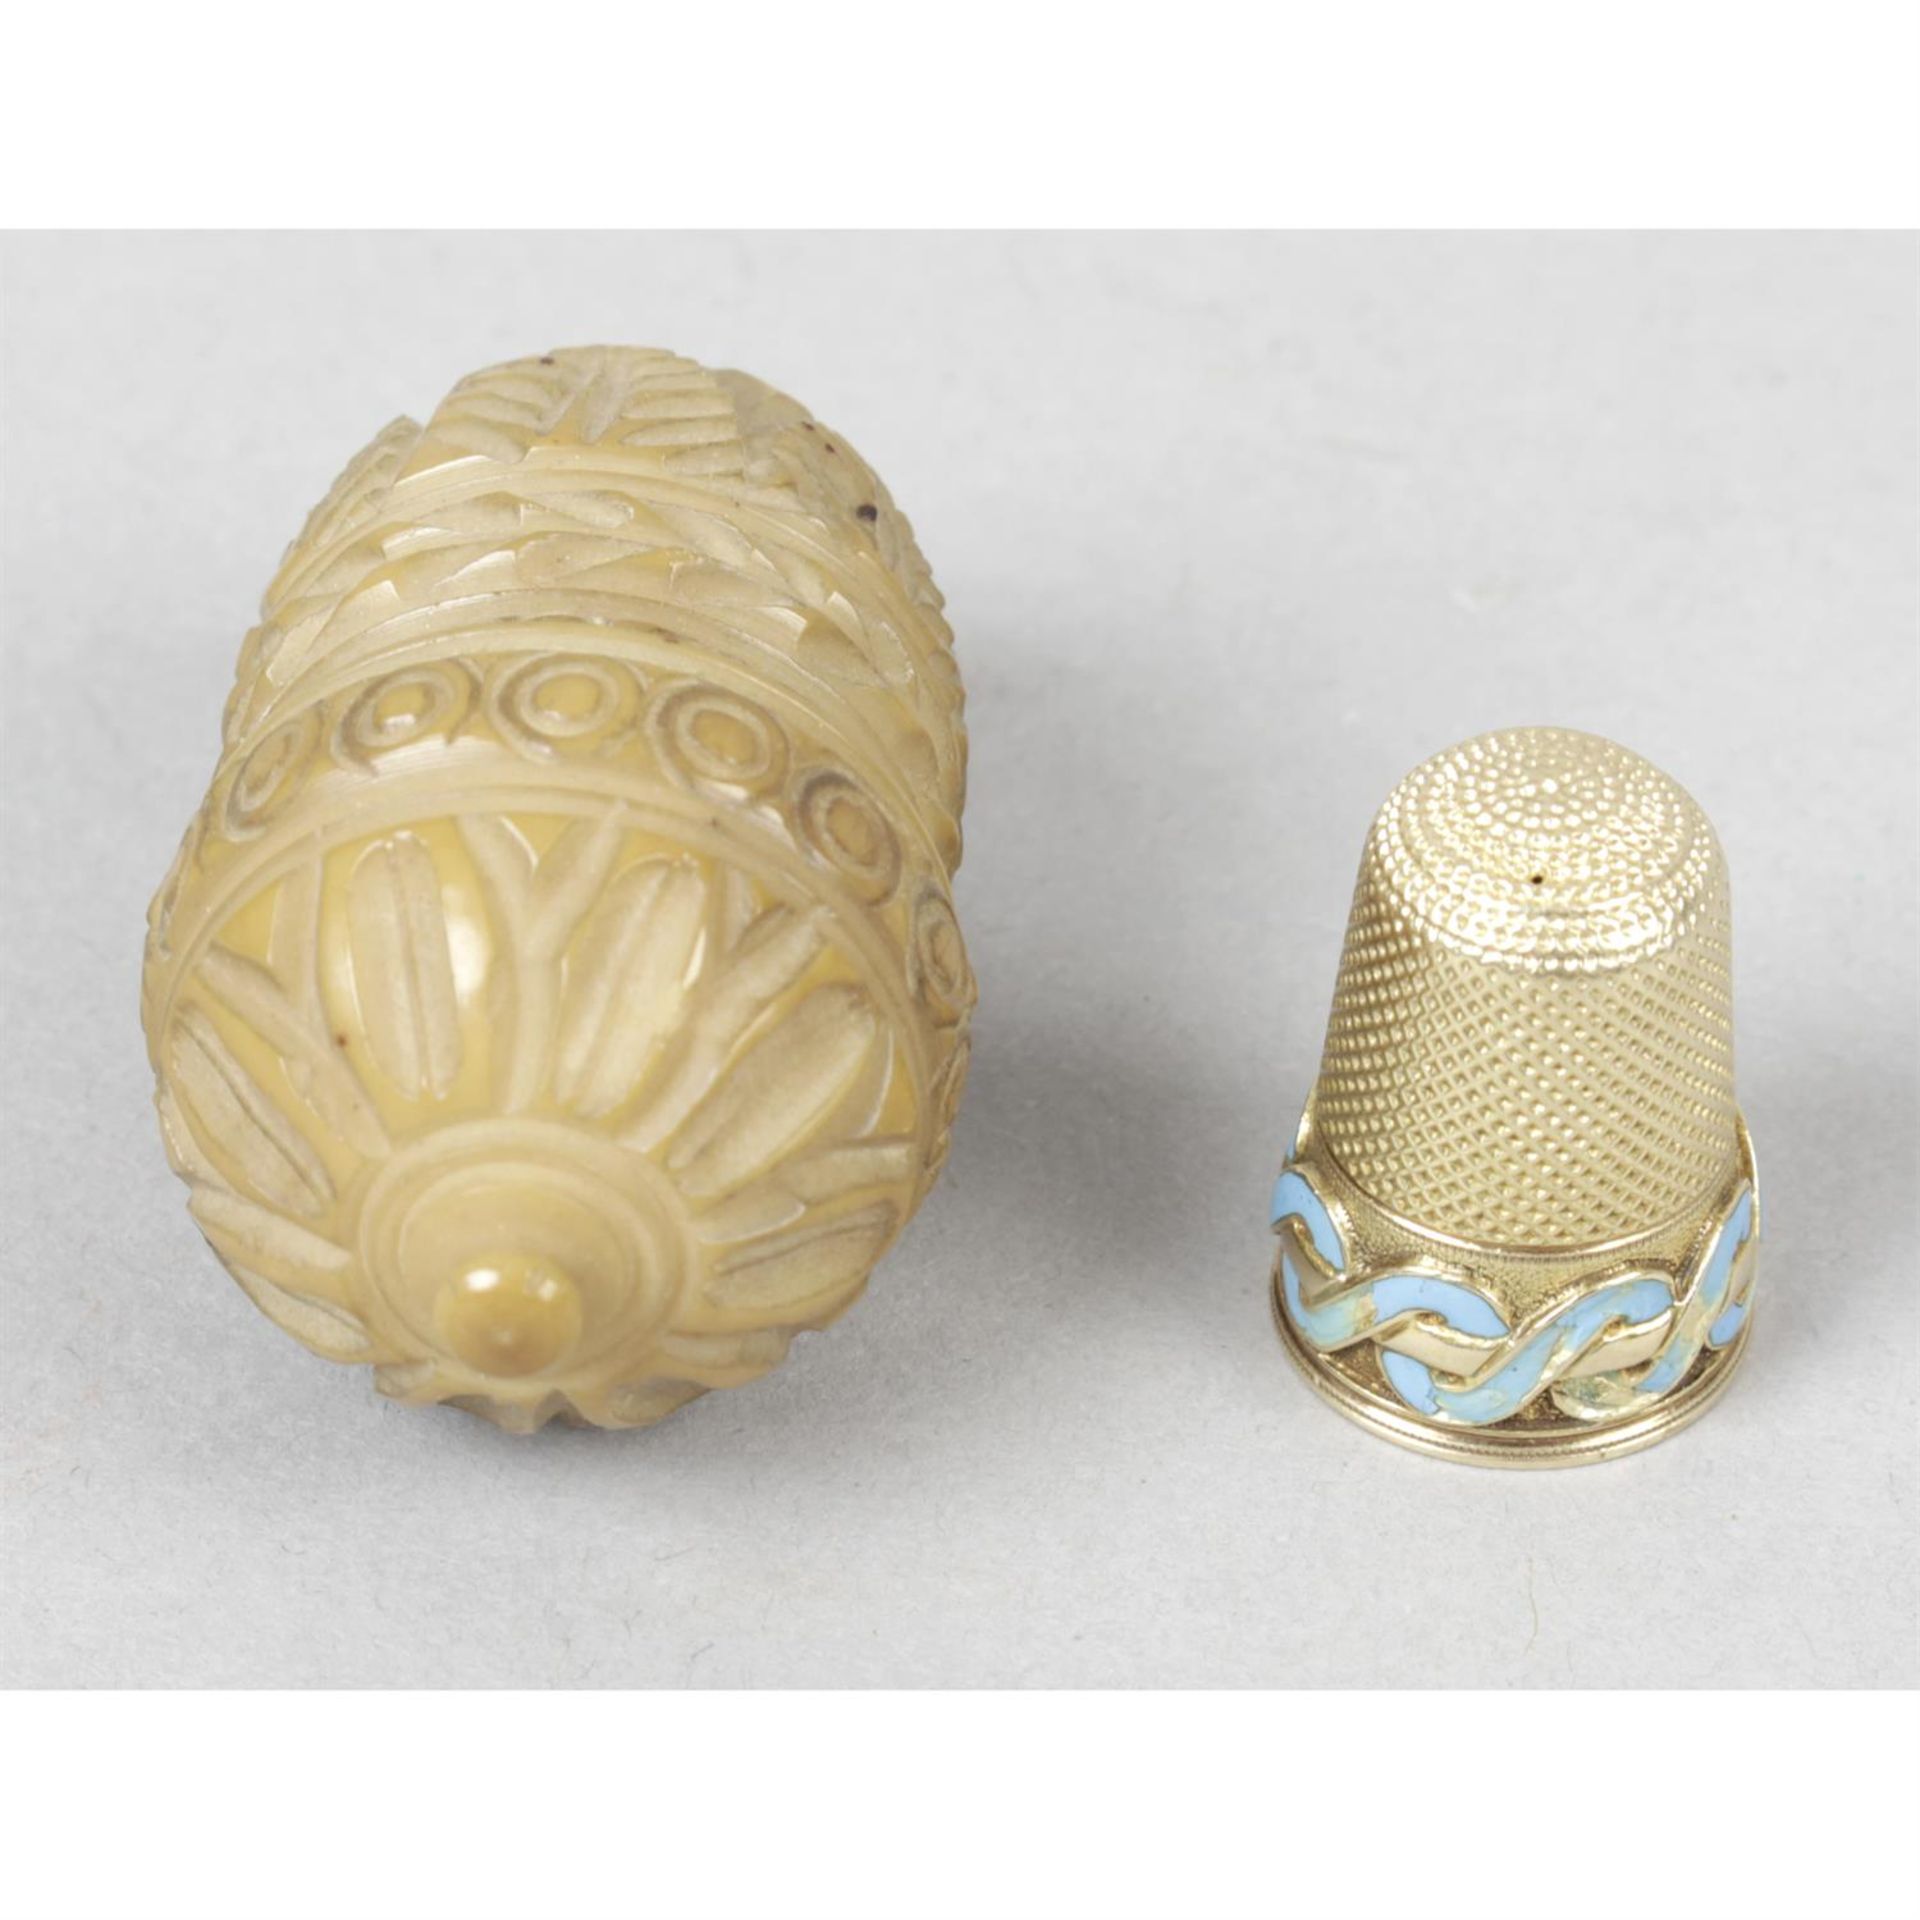 A late nineteenth century carved Coquilla nut and gold thimble.